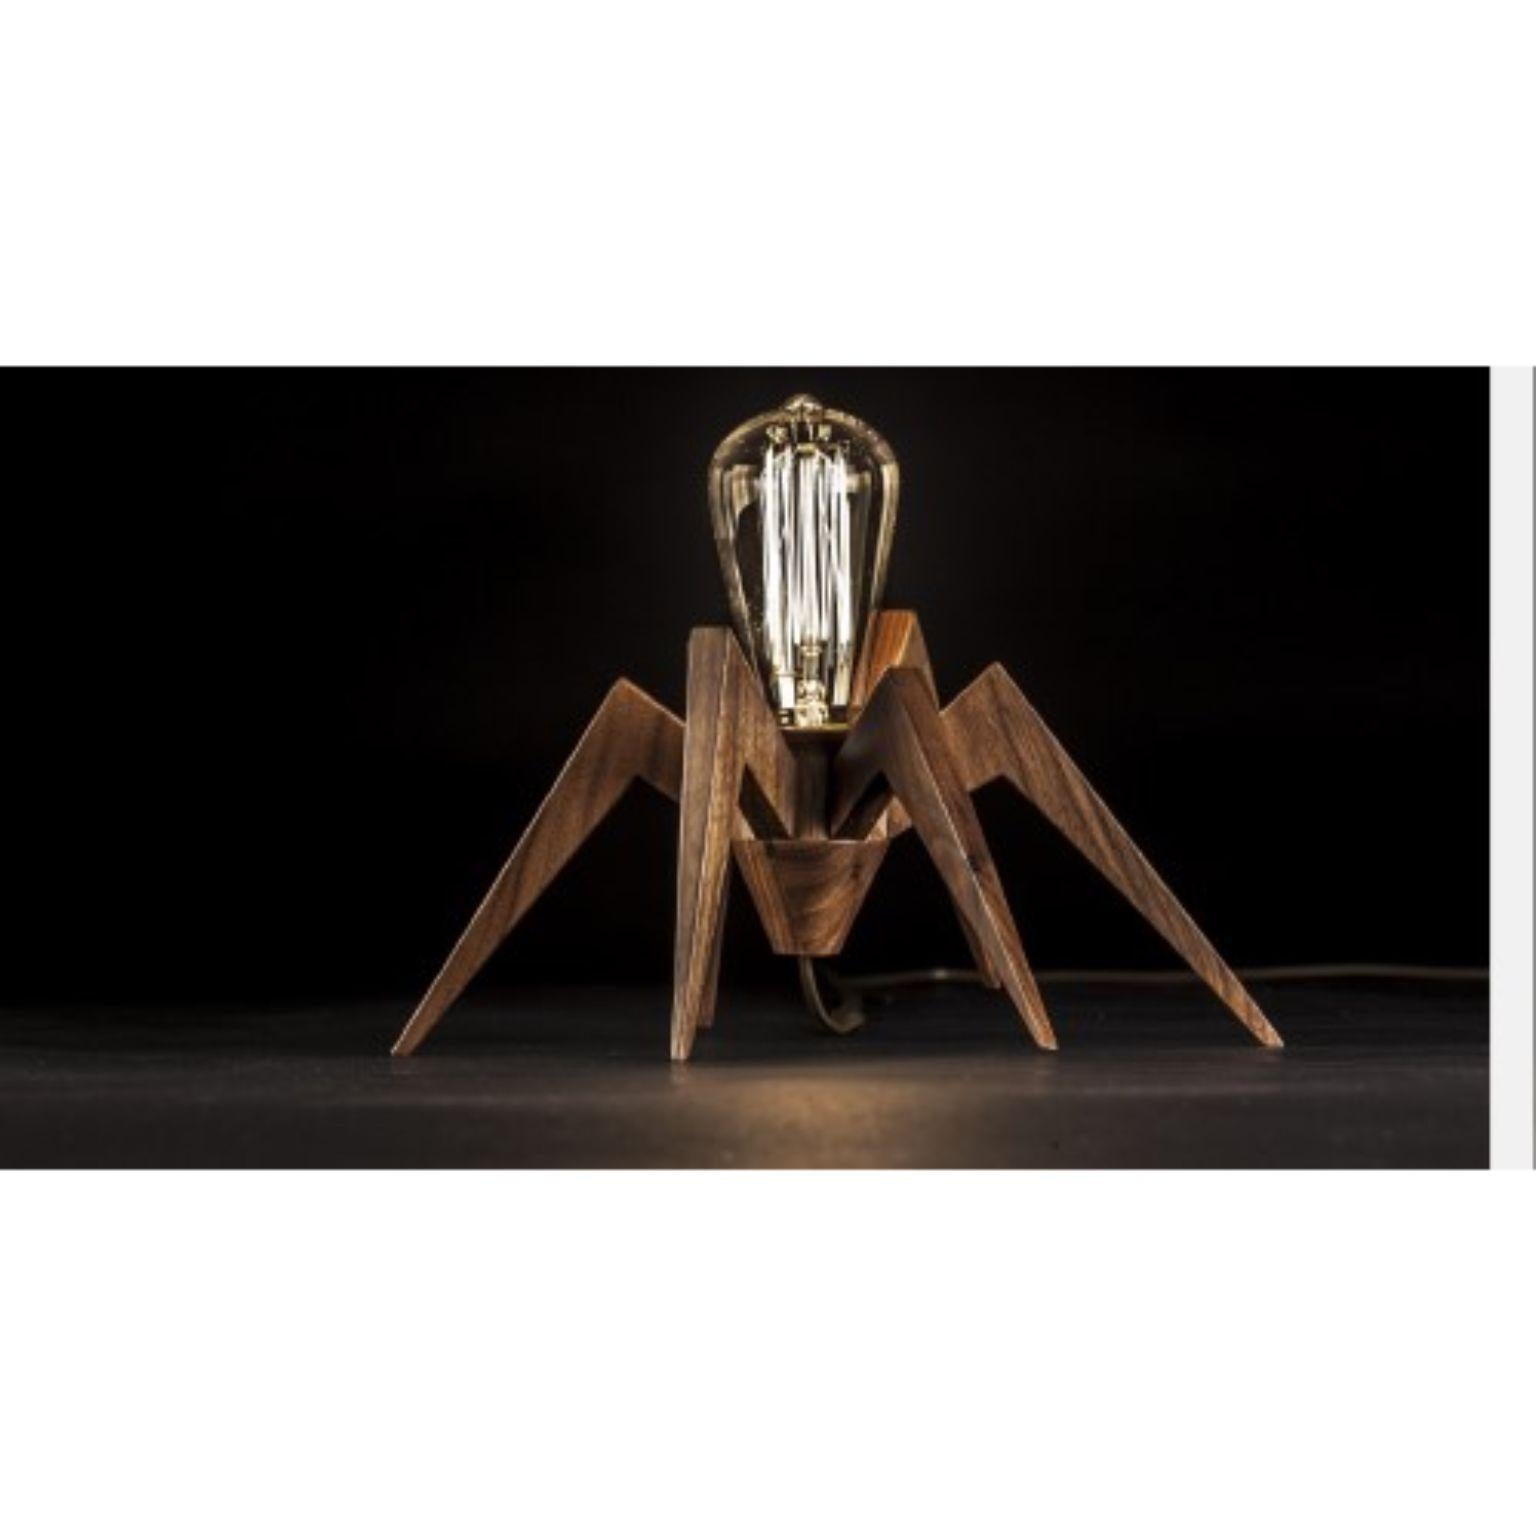 Spider lamp by Alexandre Caldas
Dimensions: W 30 x D 23 x H 14 cm
Materials: Solid walnut wood

Materials available in ash, beech, walnut

Spider lamp is a decorative light in solid wood, with the capacity to be used according to the creativity of